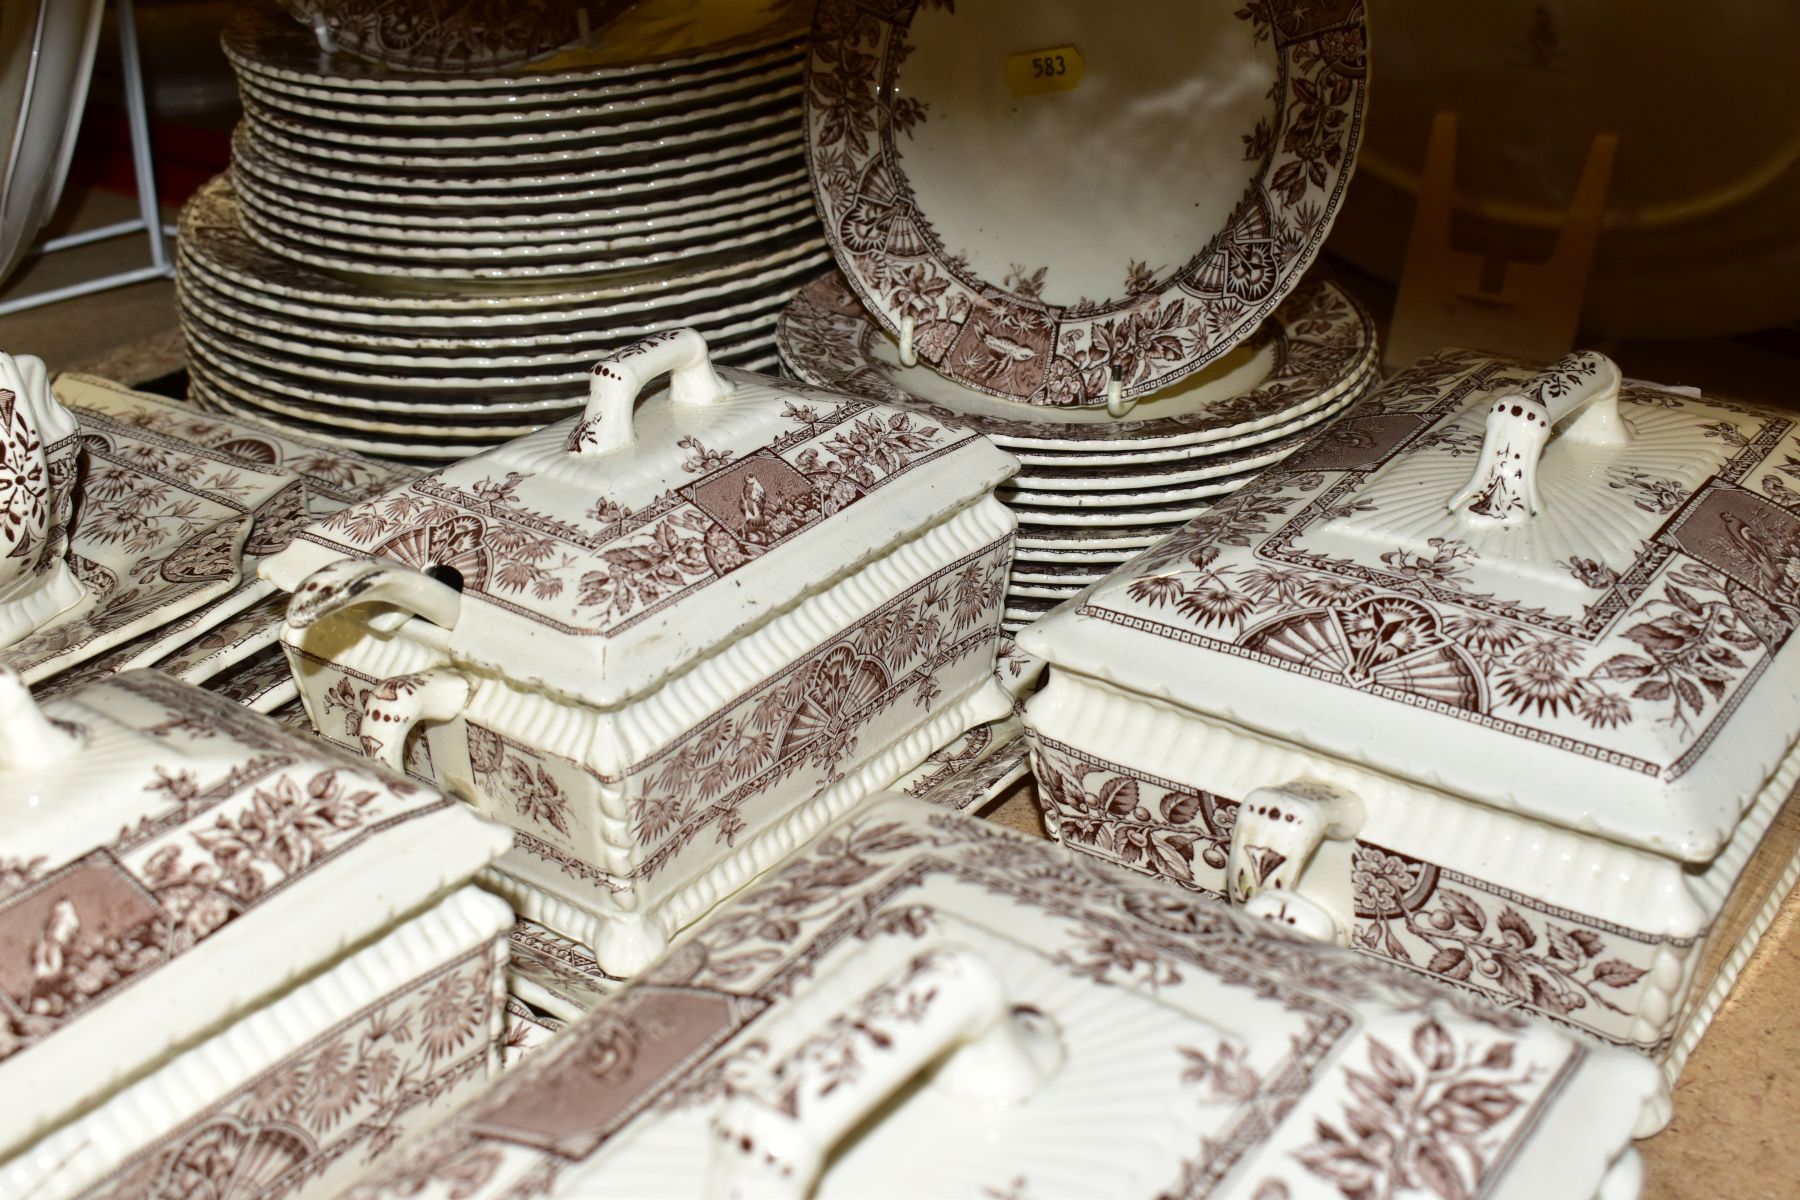 A LATE VICTORIAN EARTHENWARE DINNER SERVICE TRANSFER PRINTED IN BROWN WITH AN AESTHETIC STYLE DESIGN - Image 13 of 14